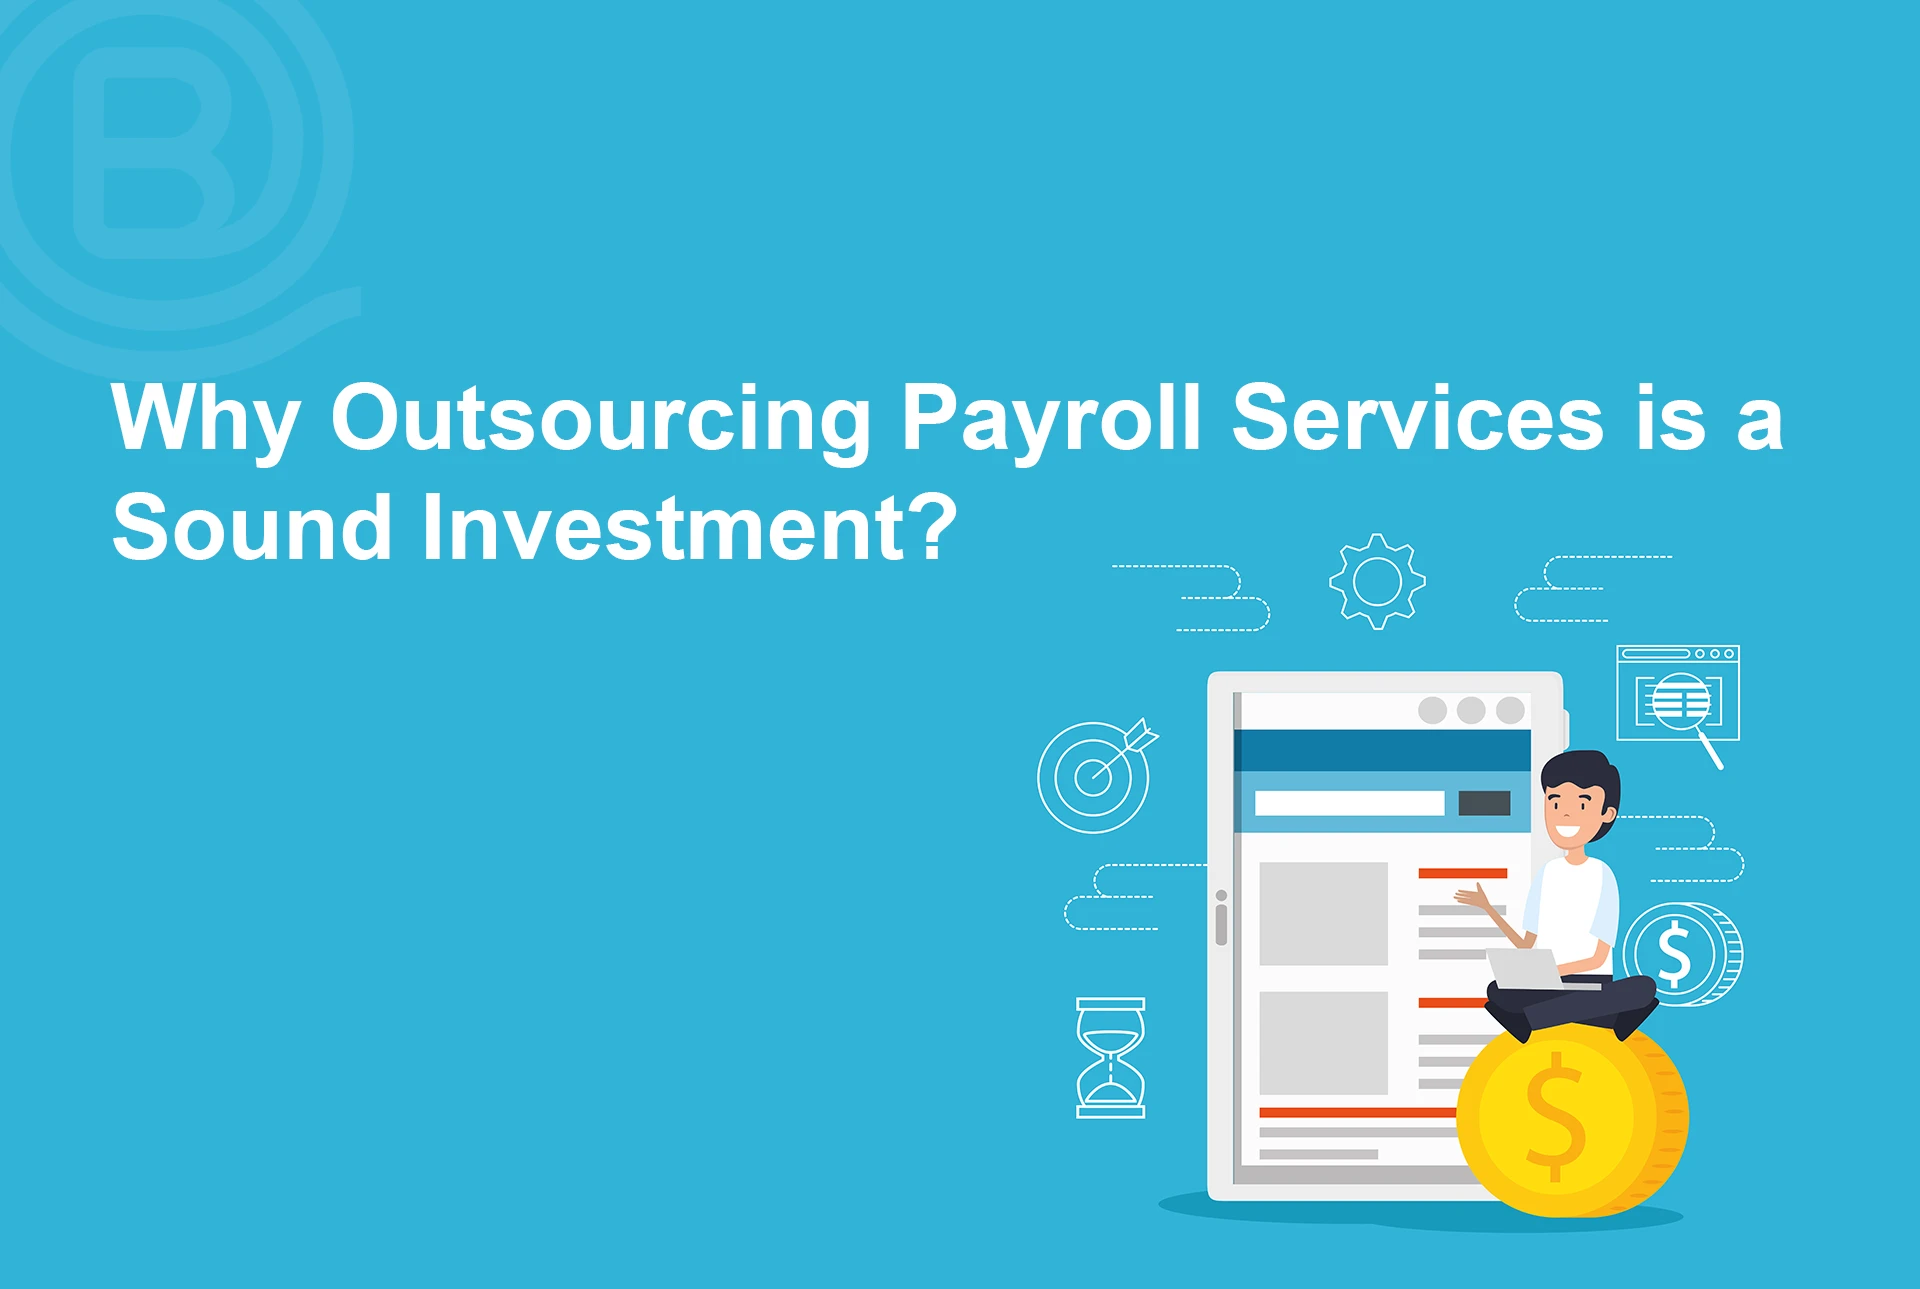 Why Outsourcing Payroll Services is a Sound Investment?